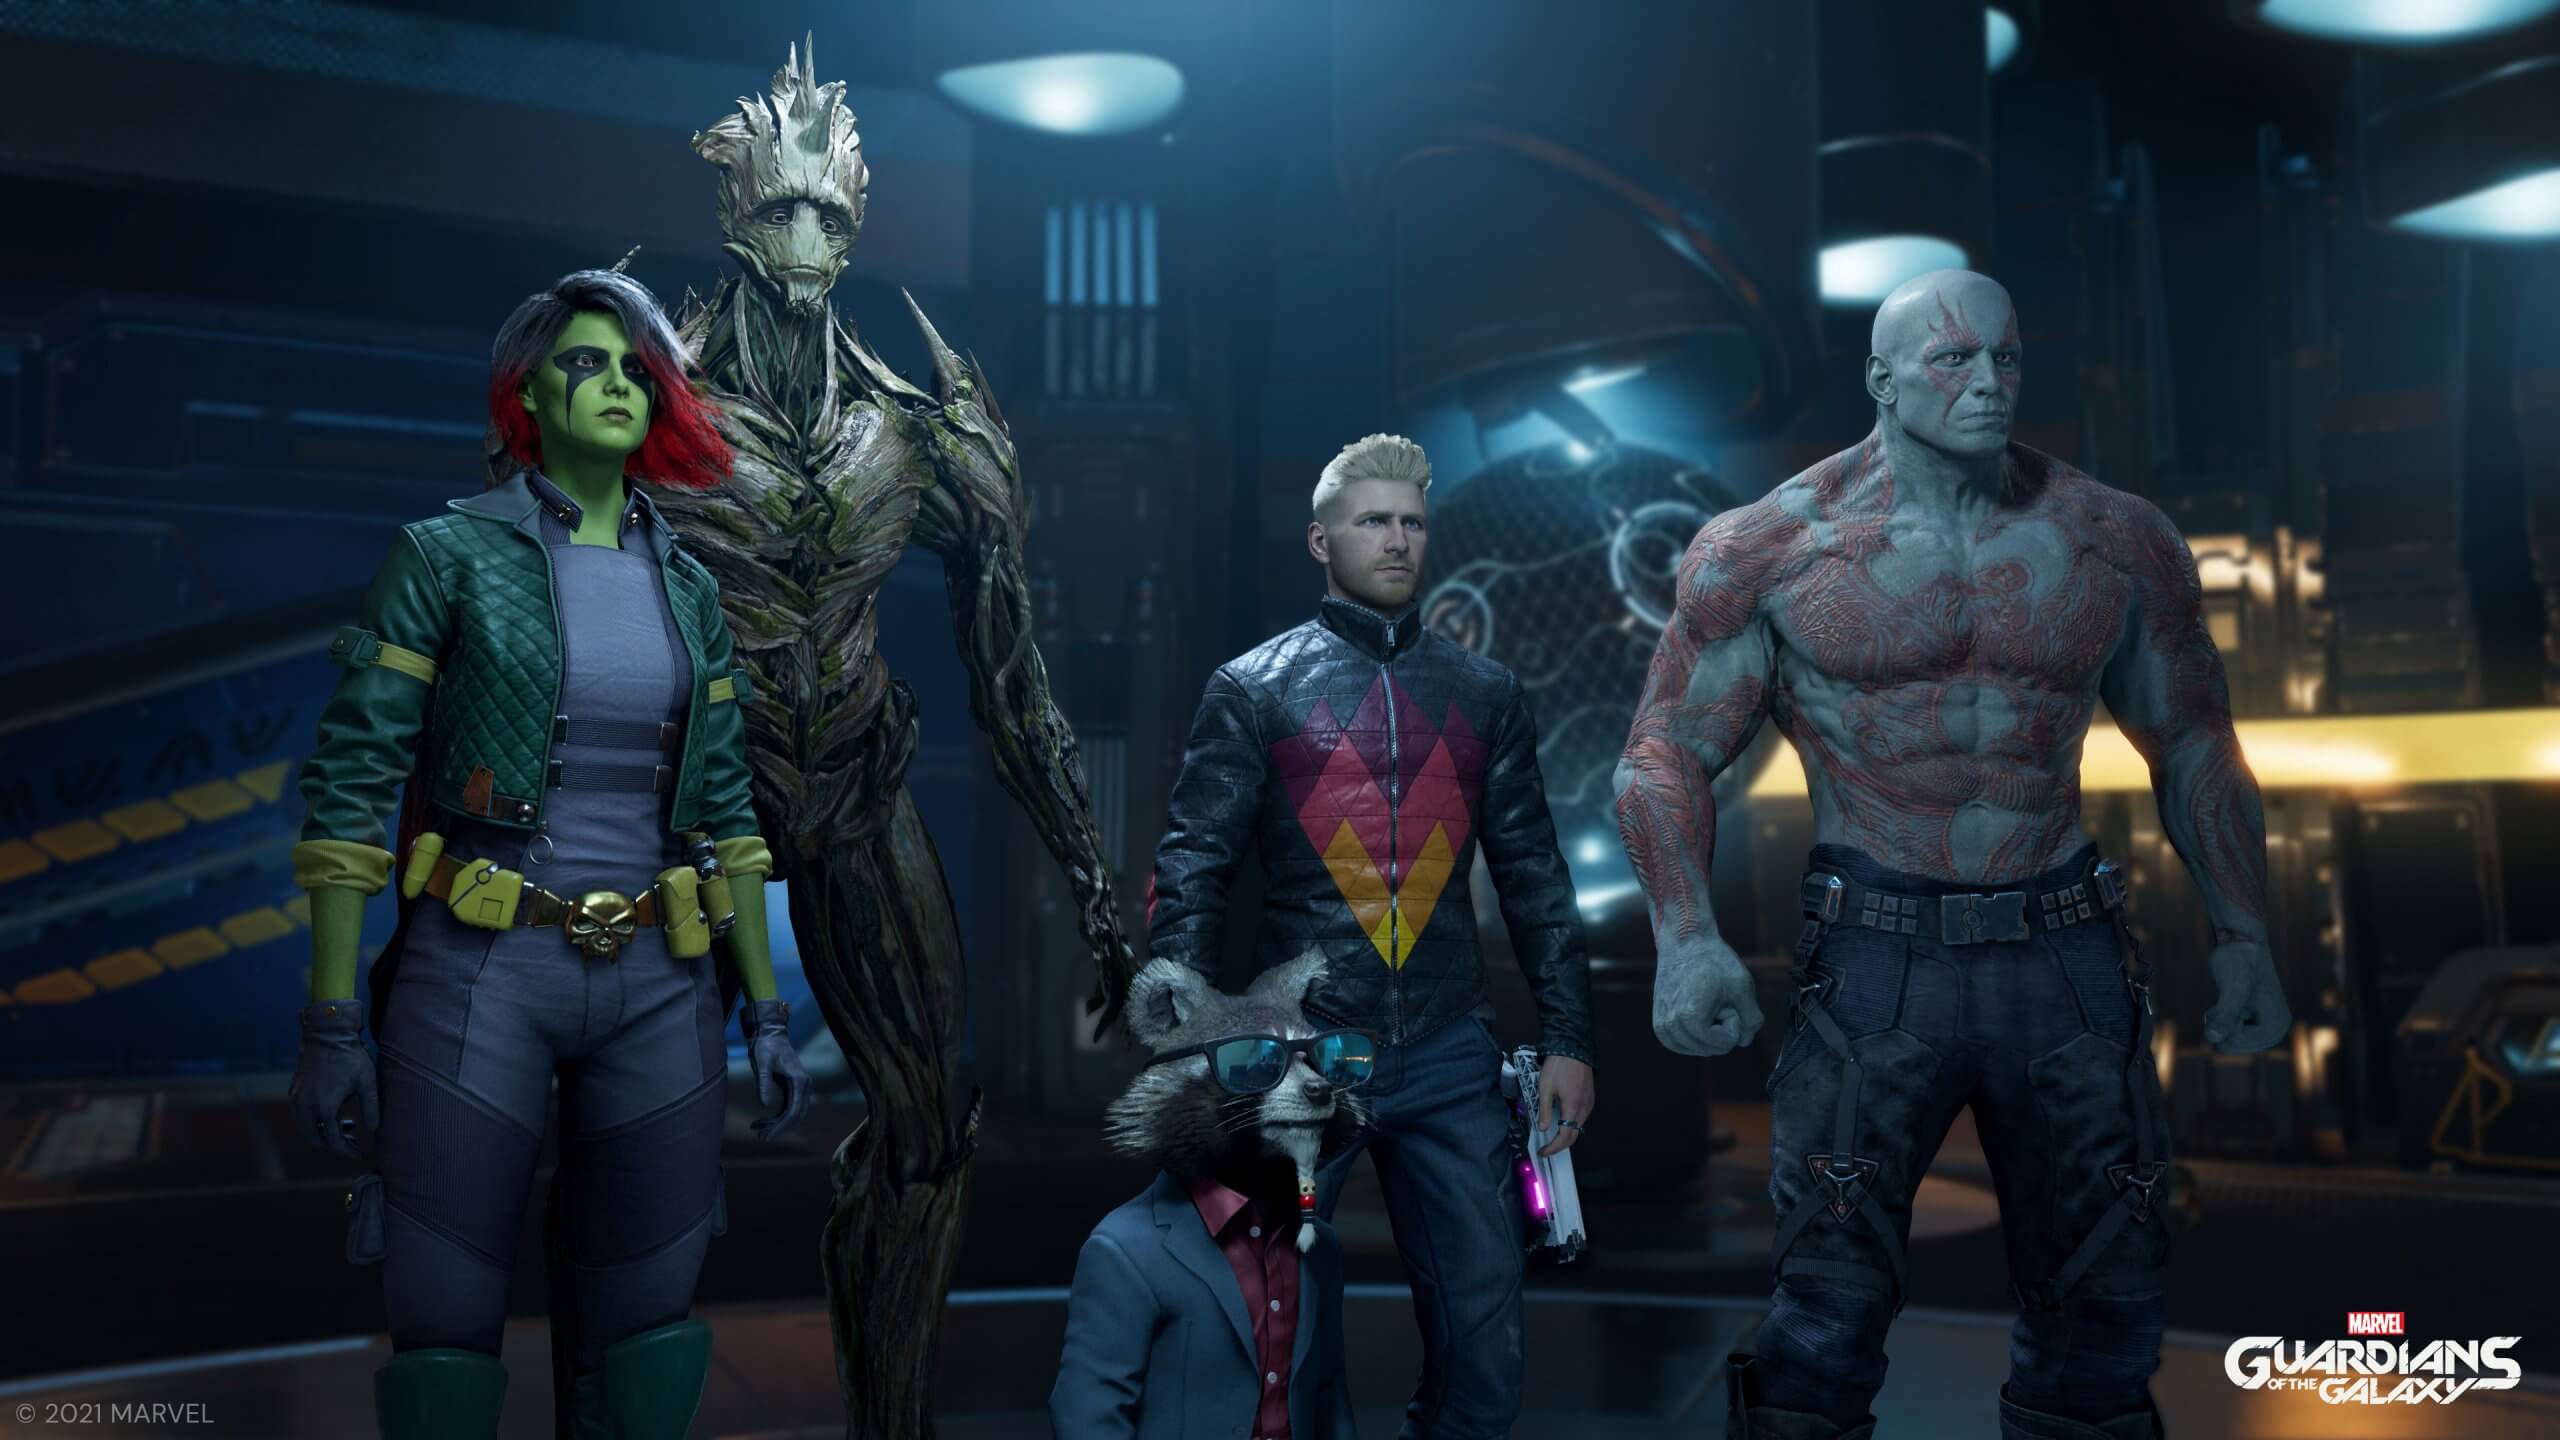 Here are some new 4K screenshots for Marvel's Guardians of the Galaxy